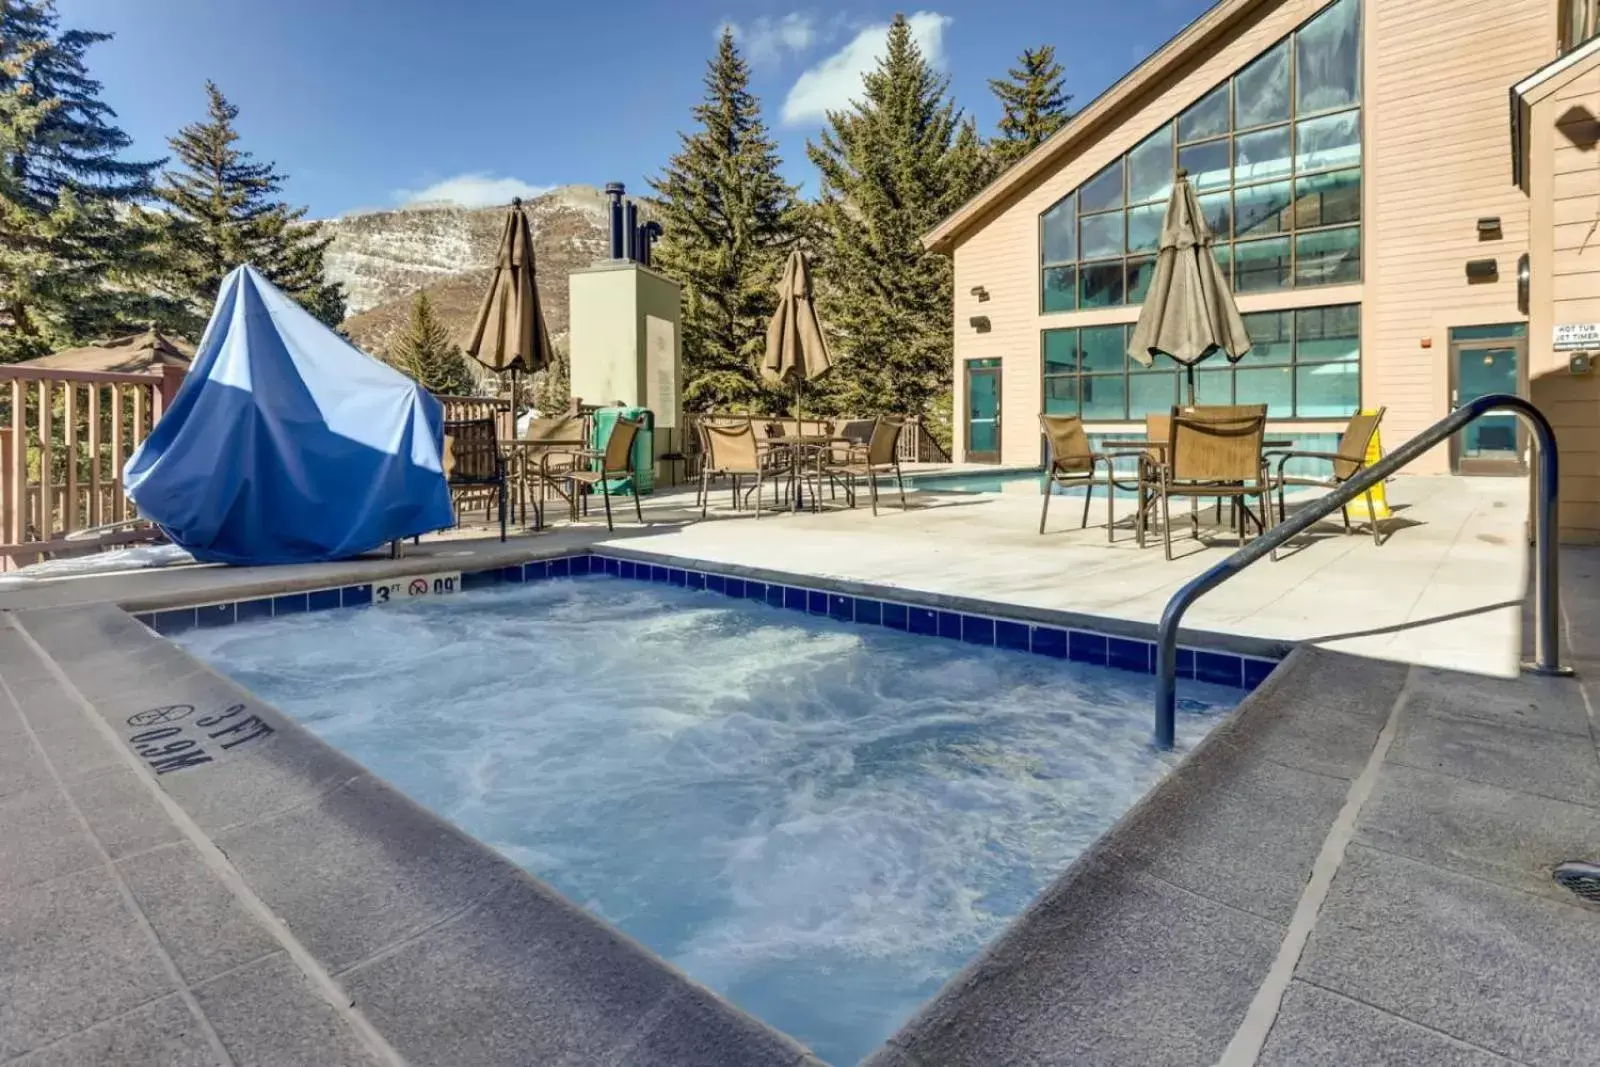 Hot Tub, Swimming Pool in Bluegreen's StreamSide at Vail